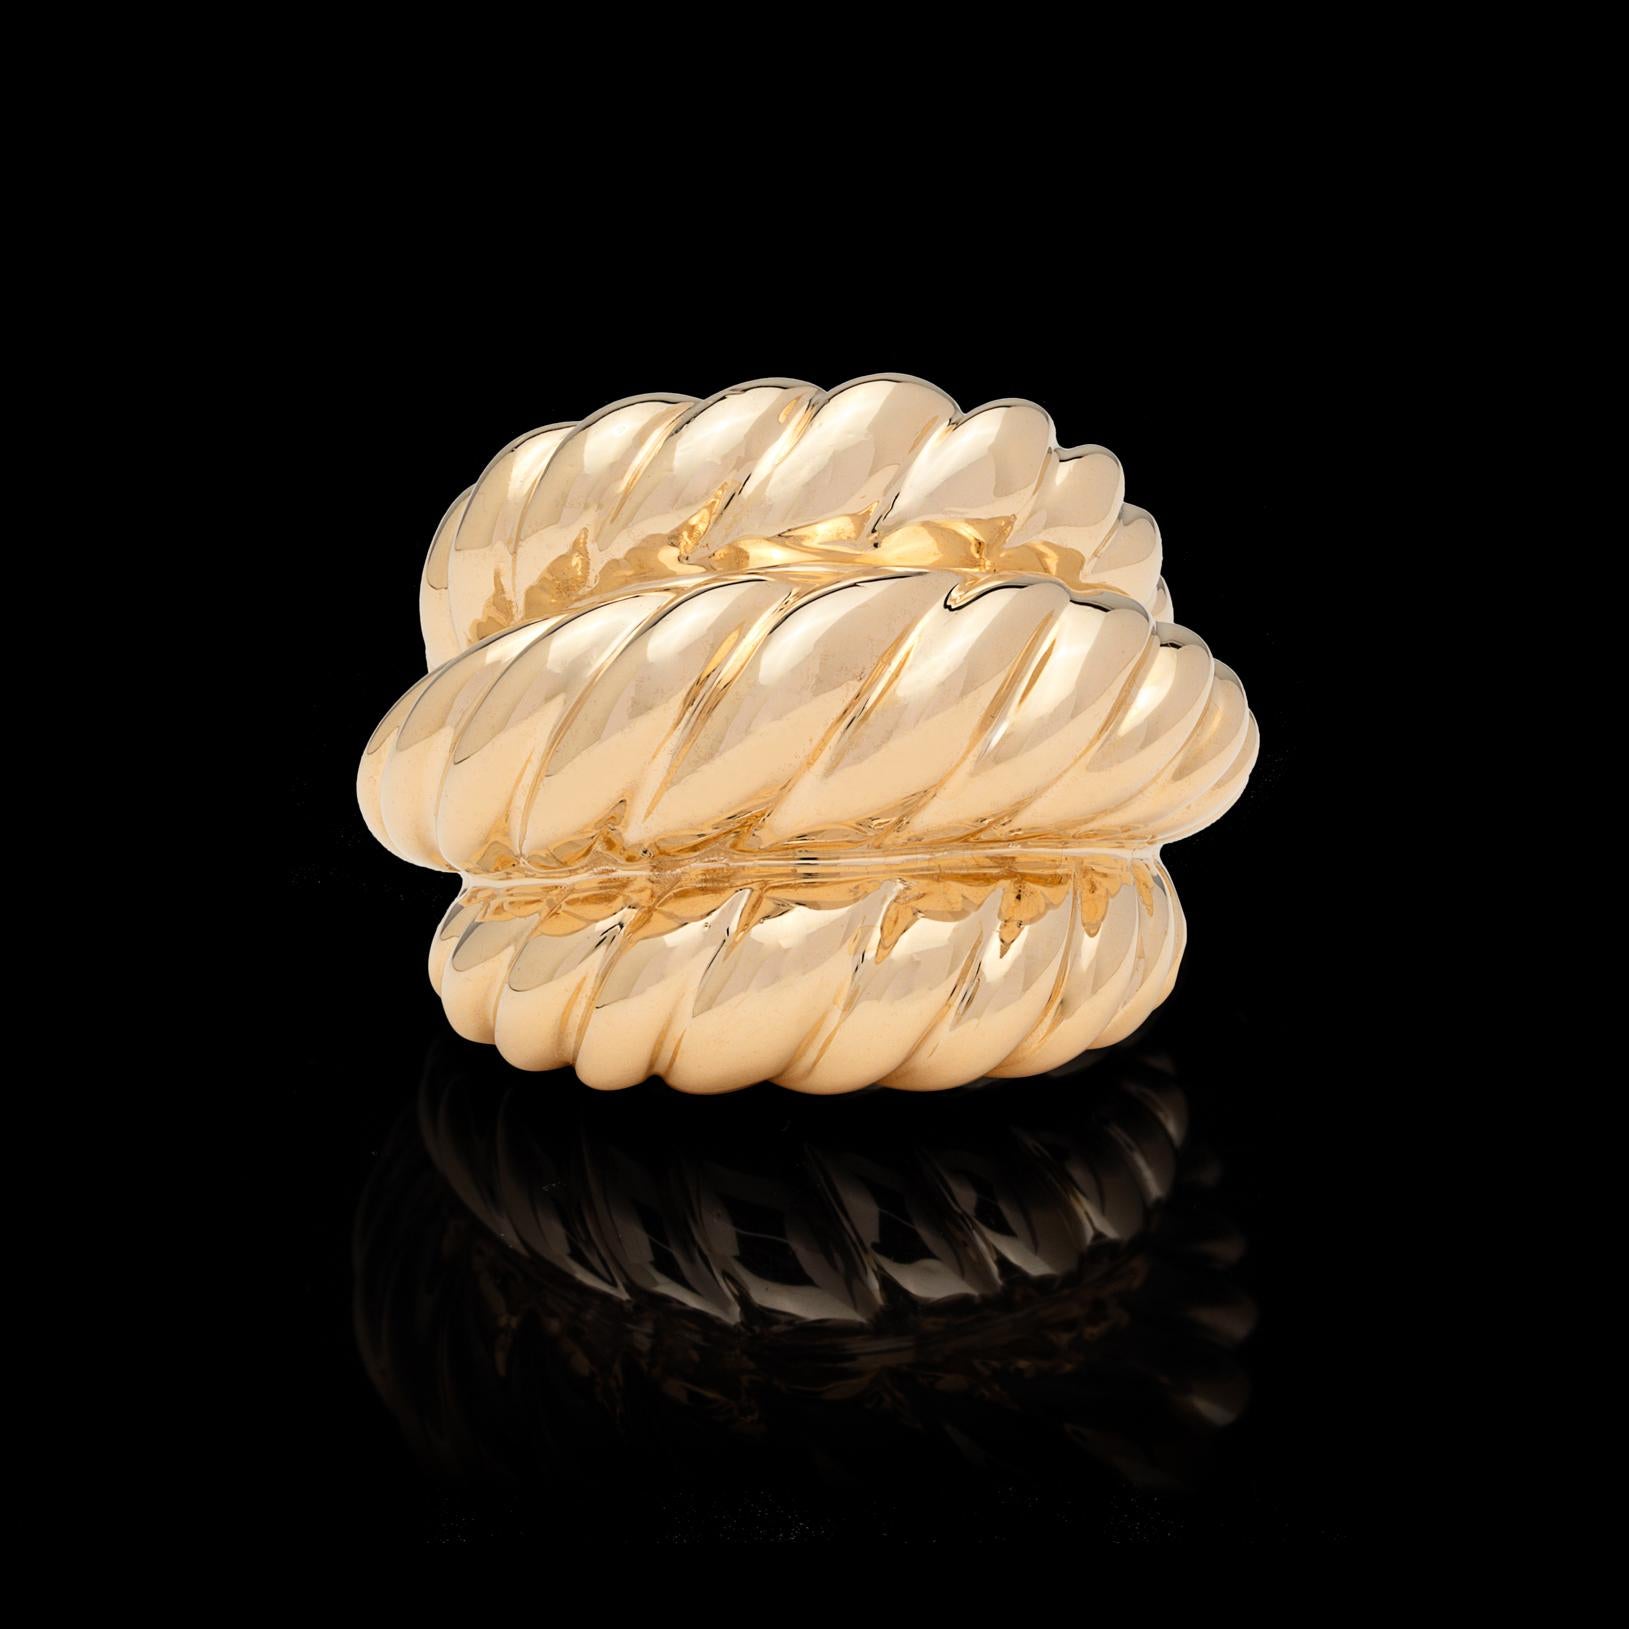 Make a statement with this 1970's 14k gold domed ring. Designed with three rows of fluted gold, this ring will quickly become a favorite. It weighs 32.51 grams, and is currently size 6 1/2 (with easy adjustment up or down). Fun and fantastic.